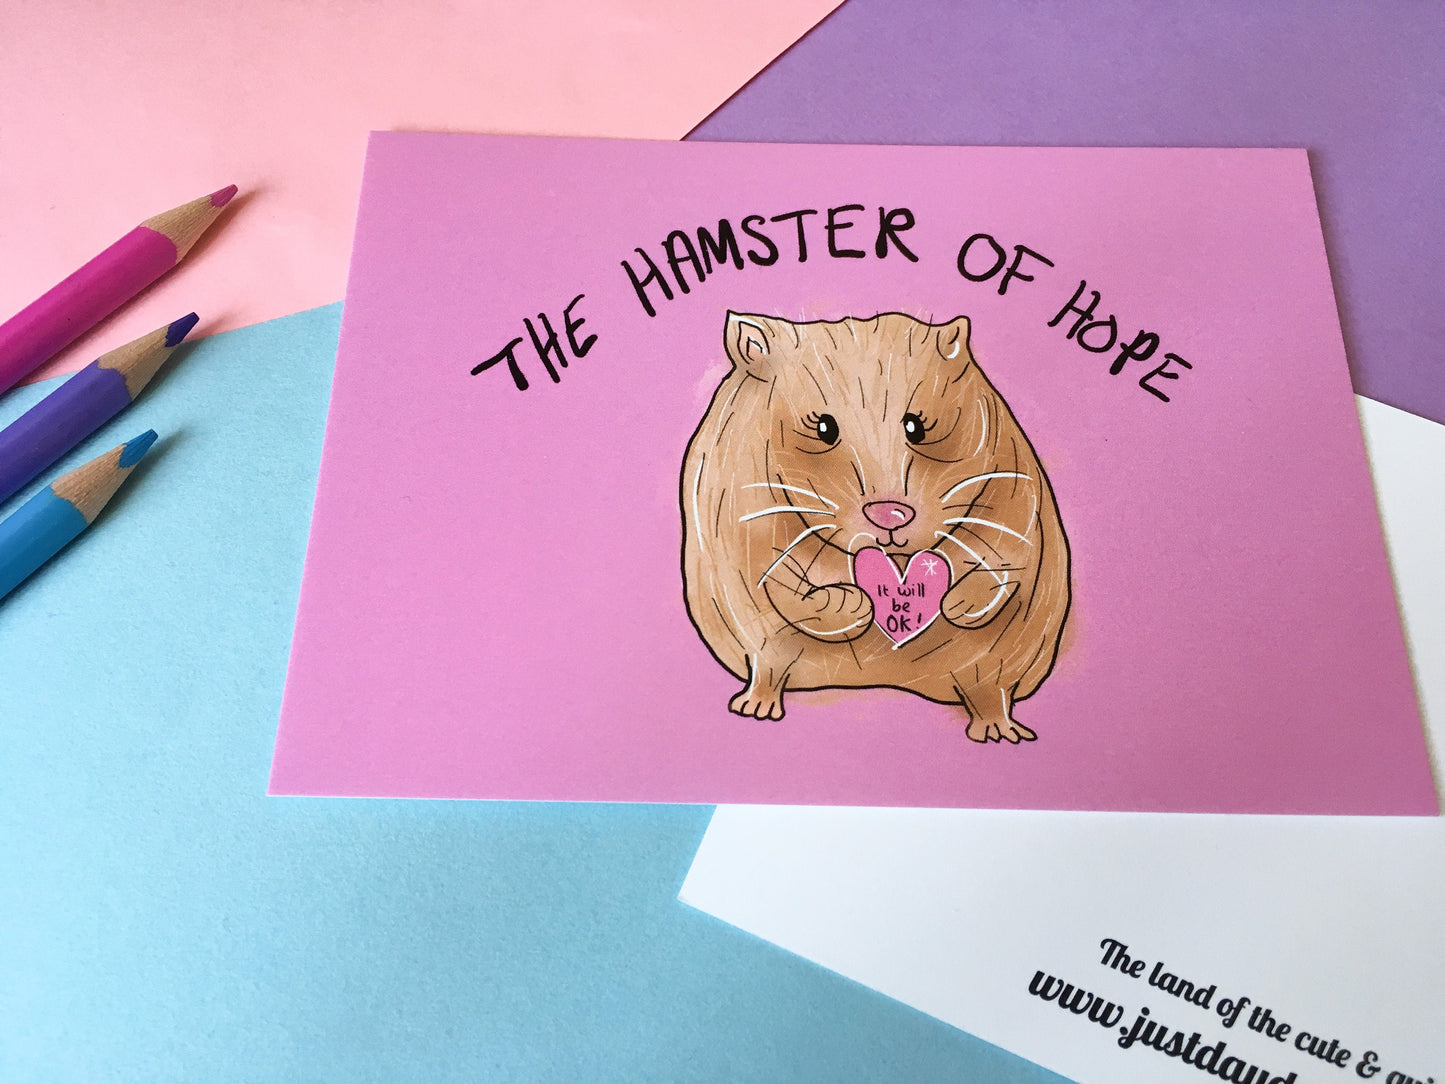 The Hamster of Hope A6 Motivational Postcard